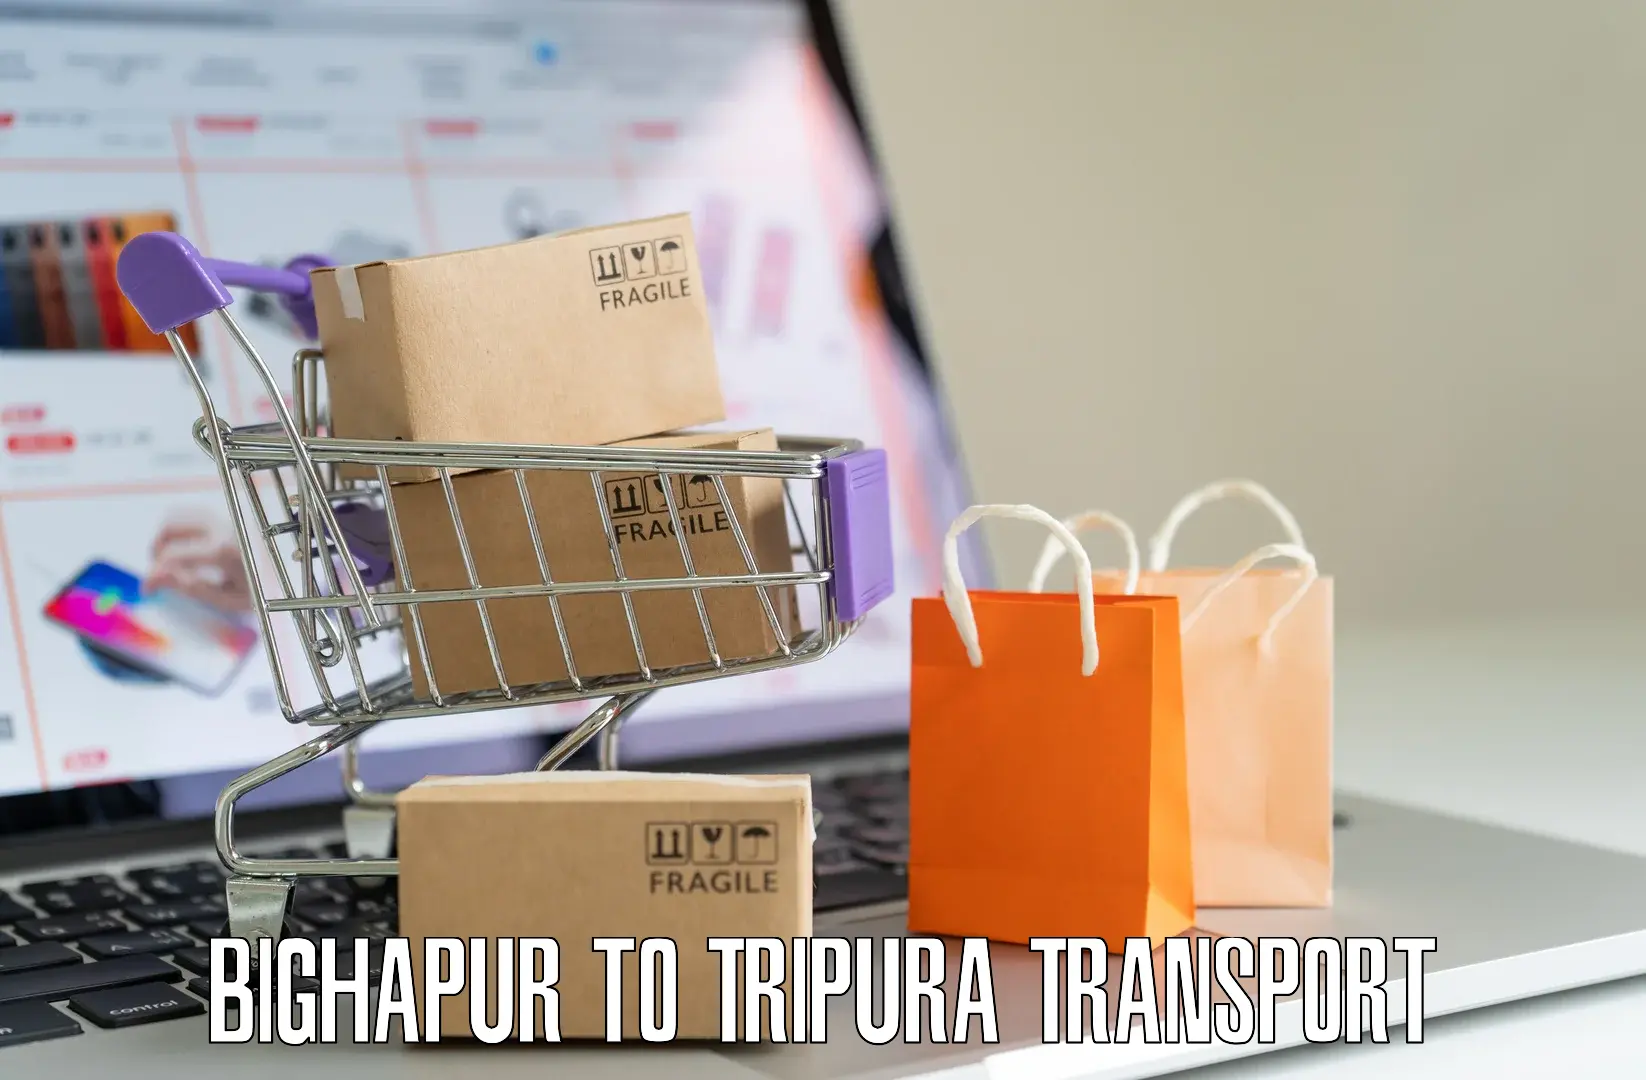 Road transport online services Bighapur to Aambasa